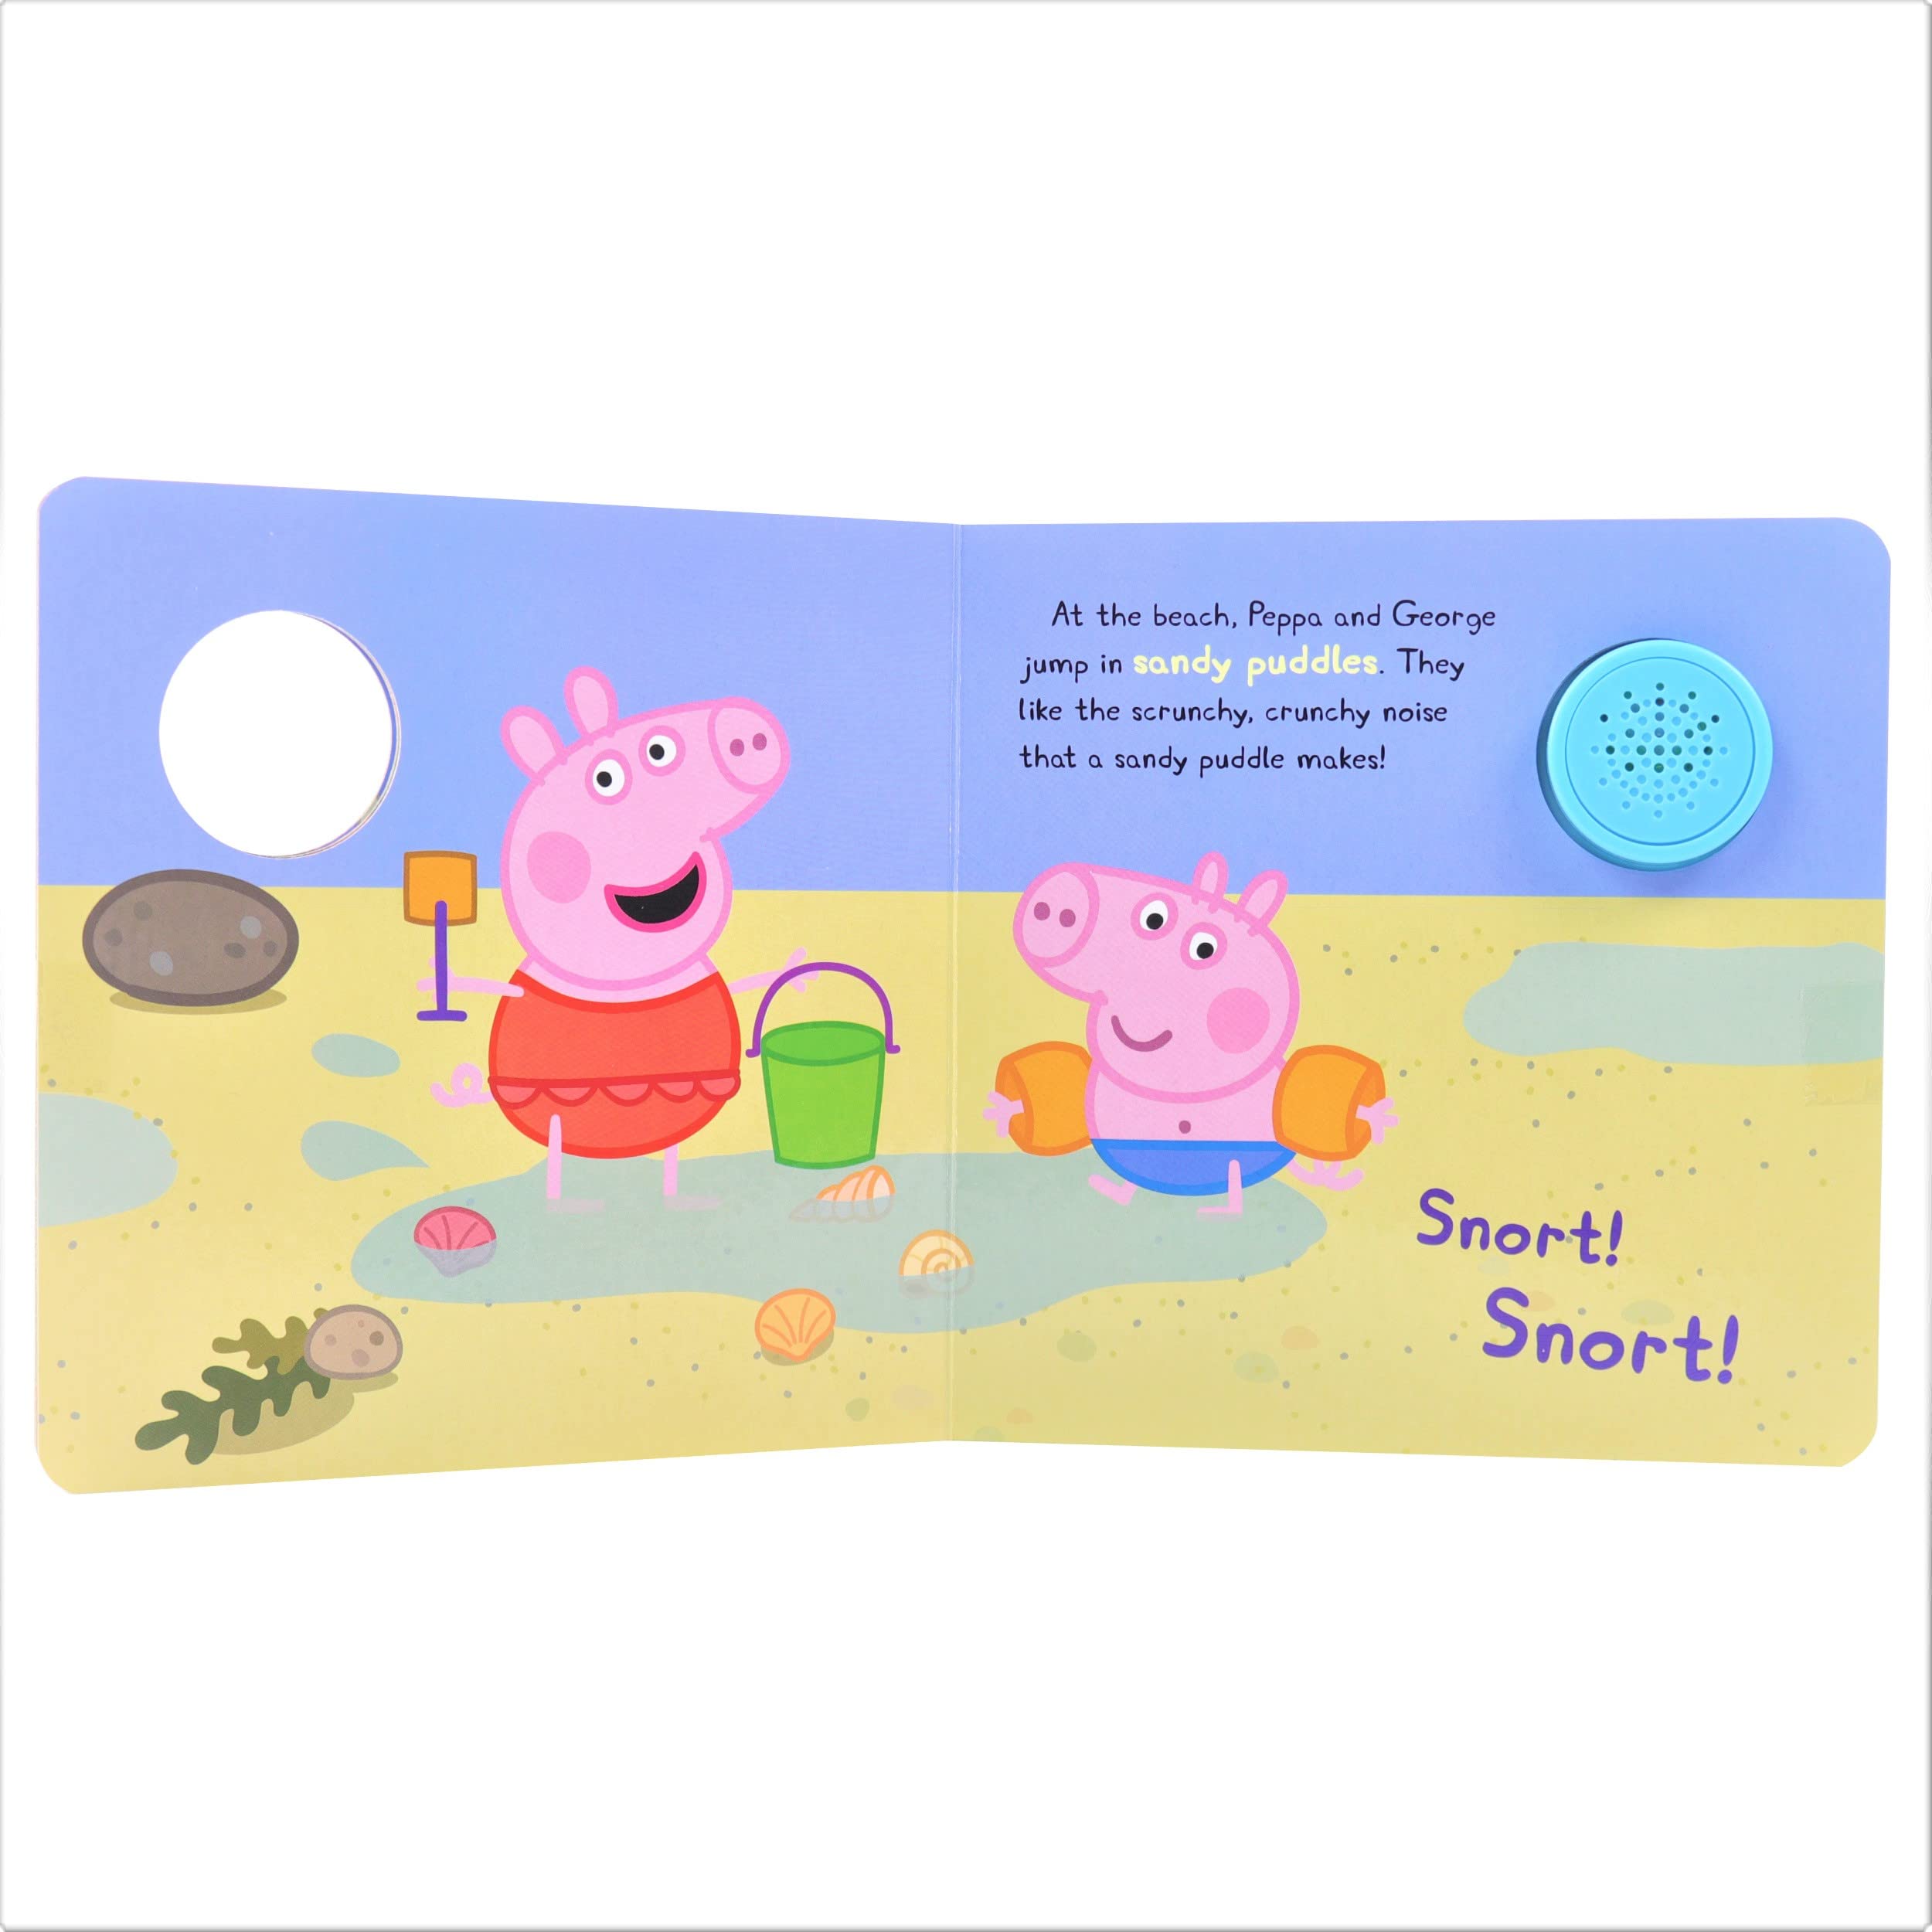 Peppa Pig - Lots of Puddles! Sound Book - PI Kids (Play-A-Sound)